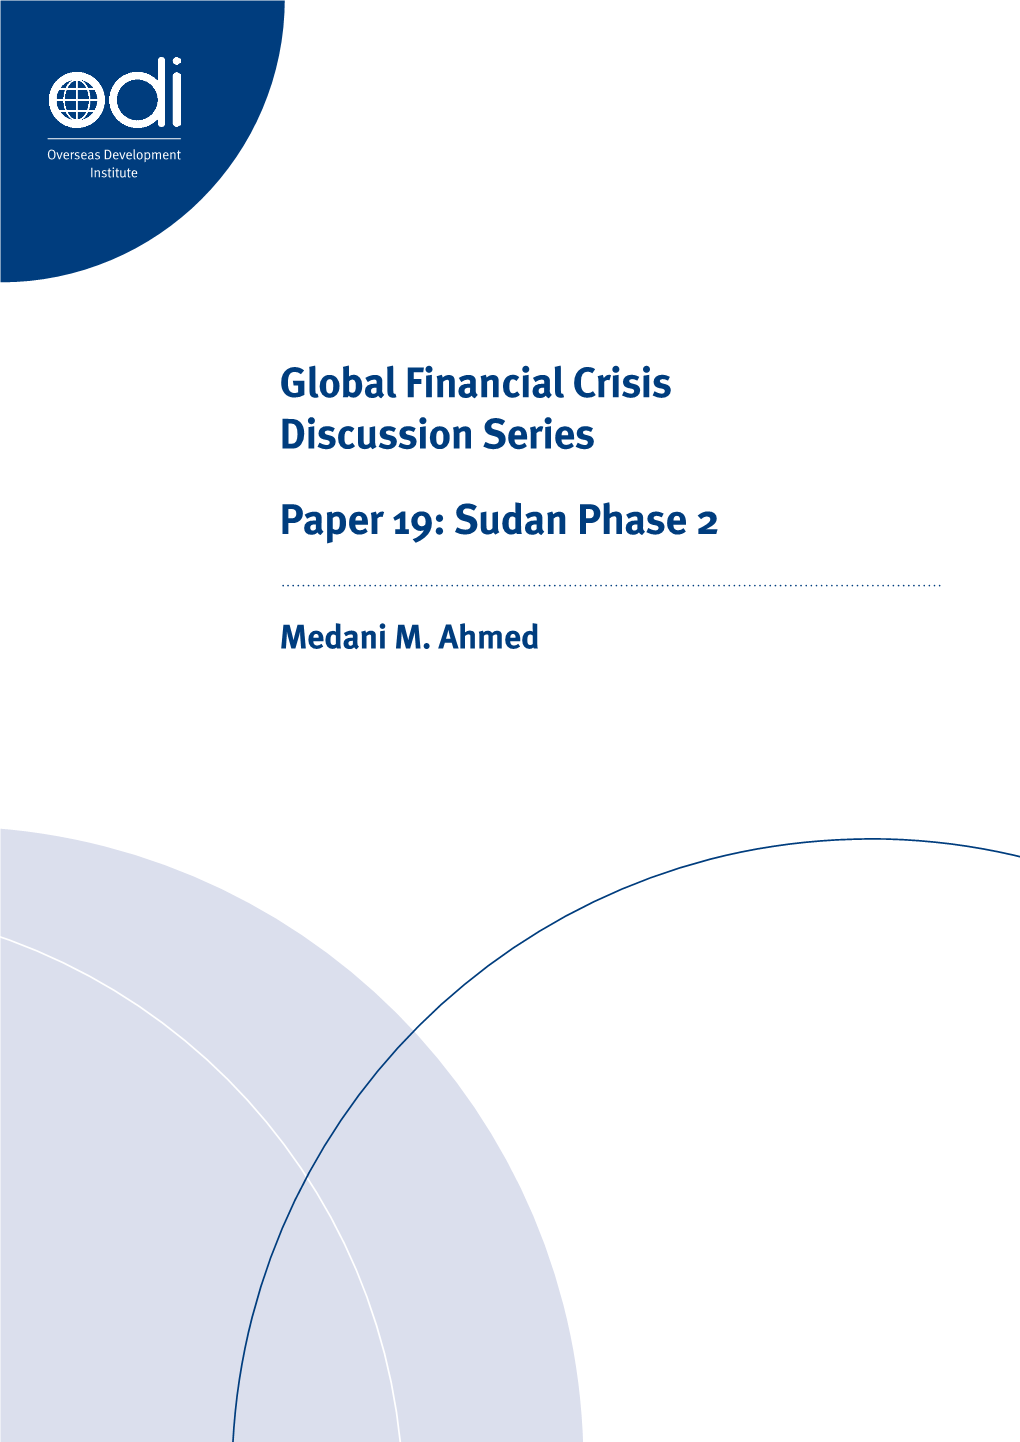 Global Financial Crisis Discussion Series Paper 19: Sudan Phase 2